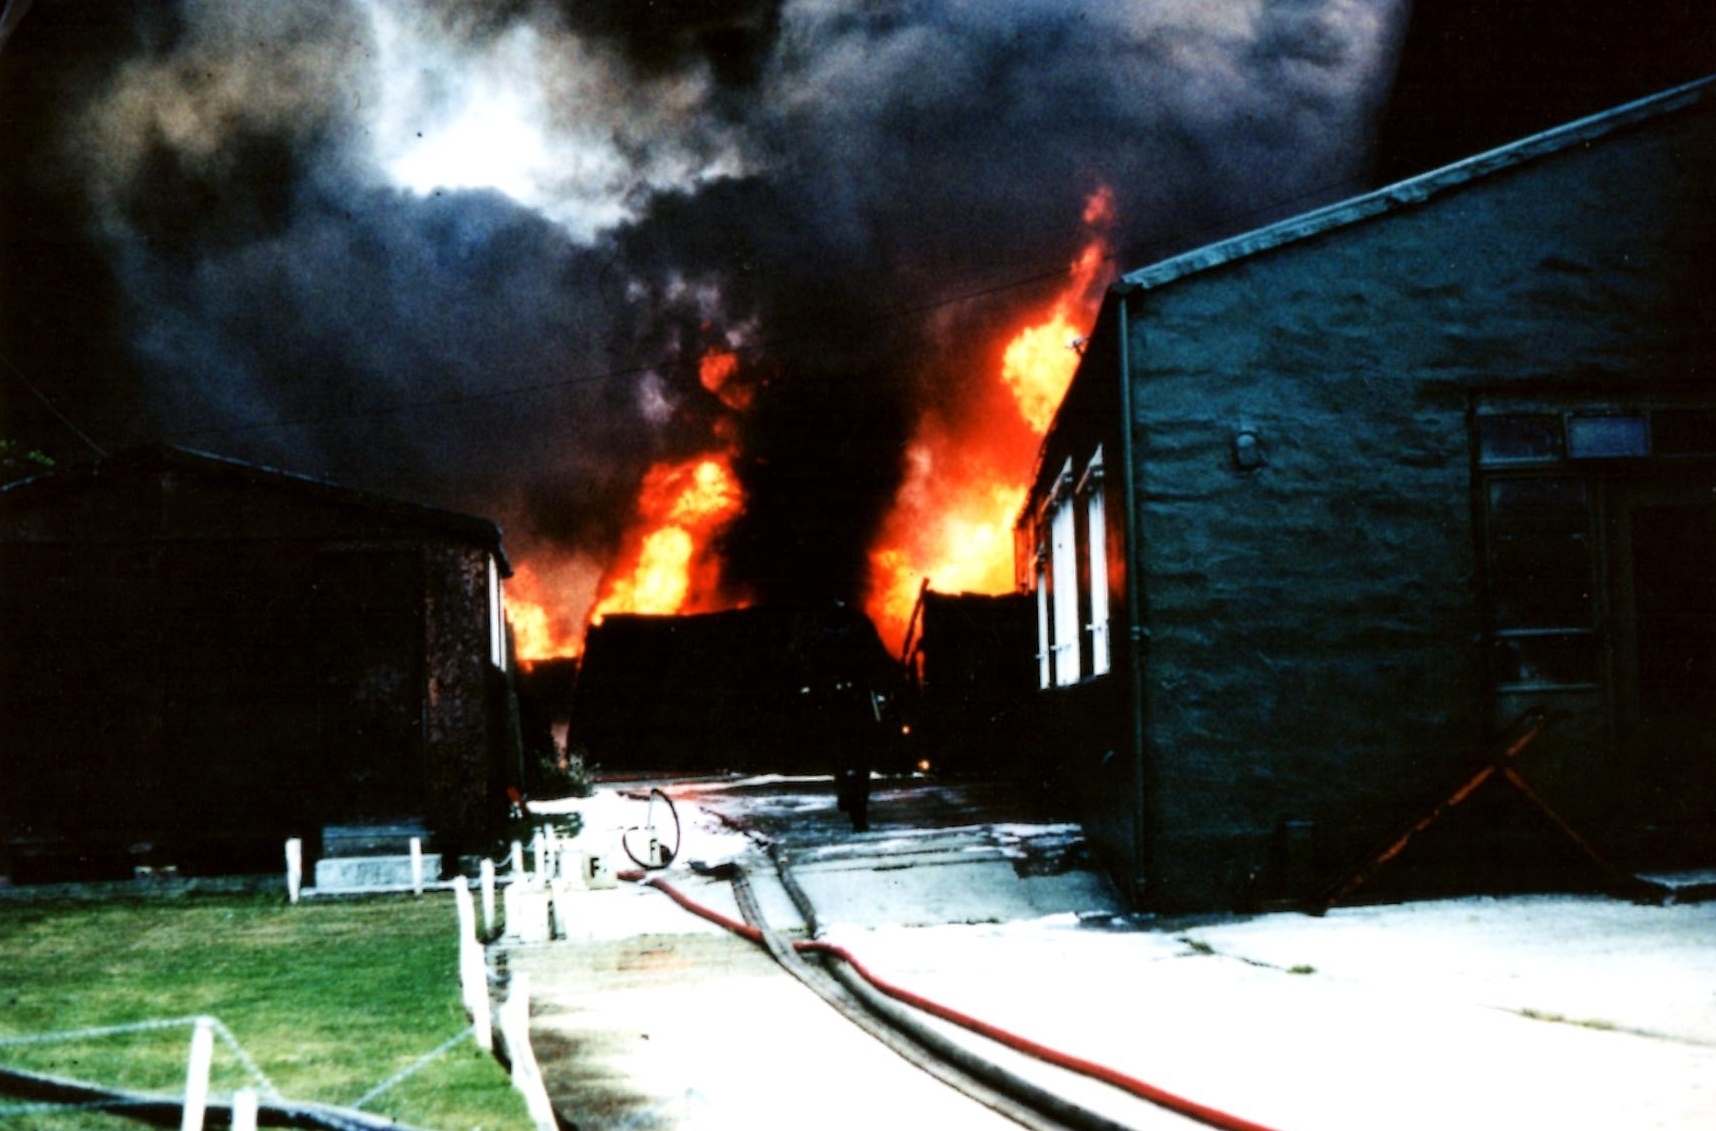 Fire in July 1967 at Farrow & Ball paint factory in Verwood. Explosions could be heard across Verwood..